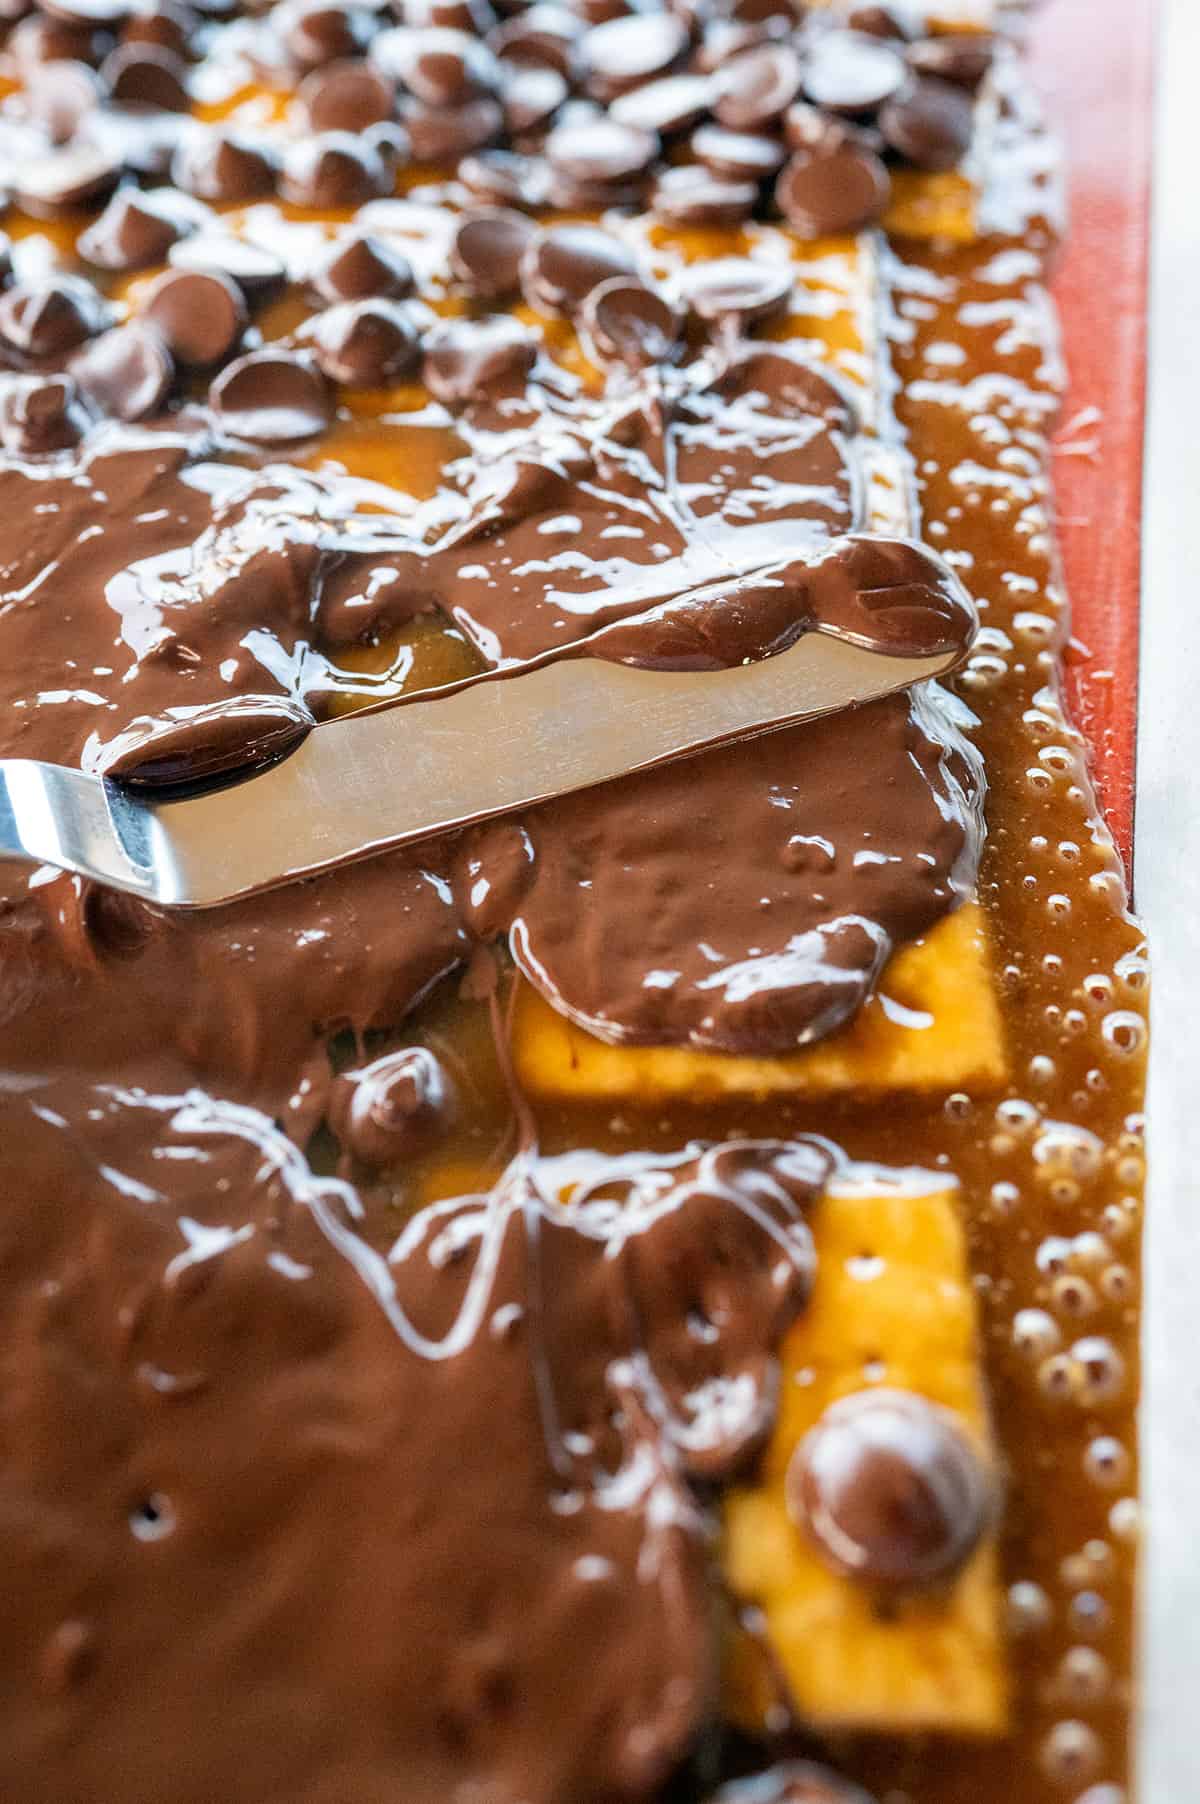 Spreading melted chocolate with an offset spatula.